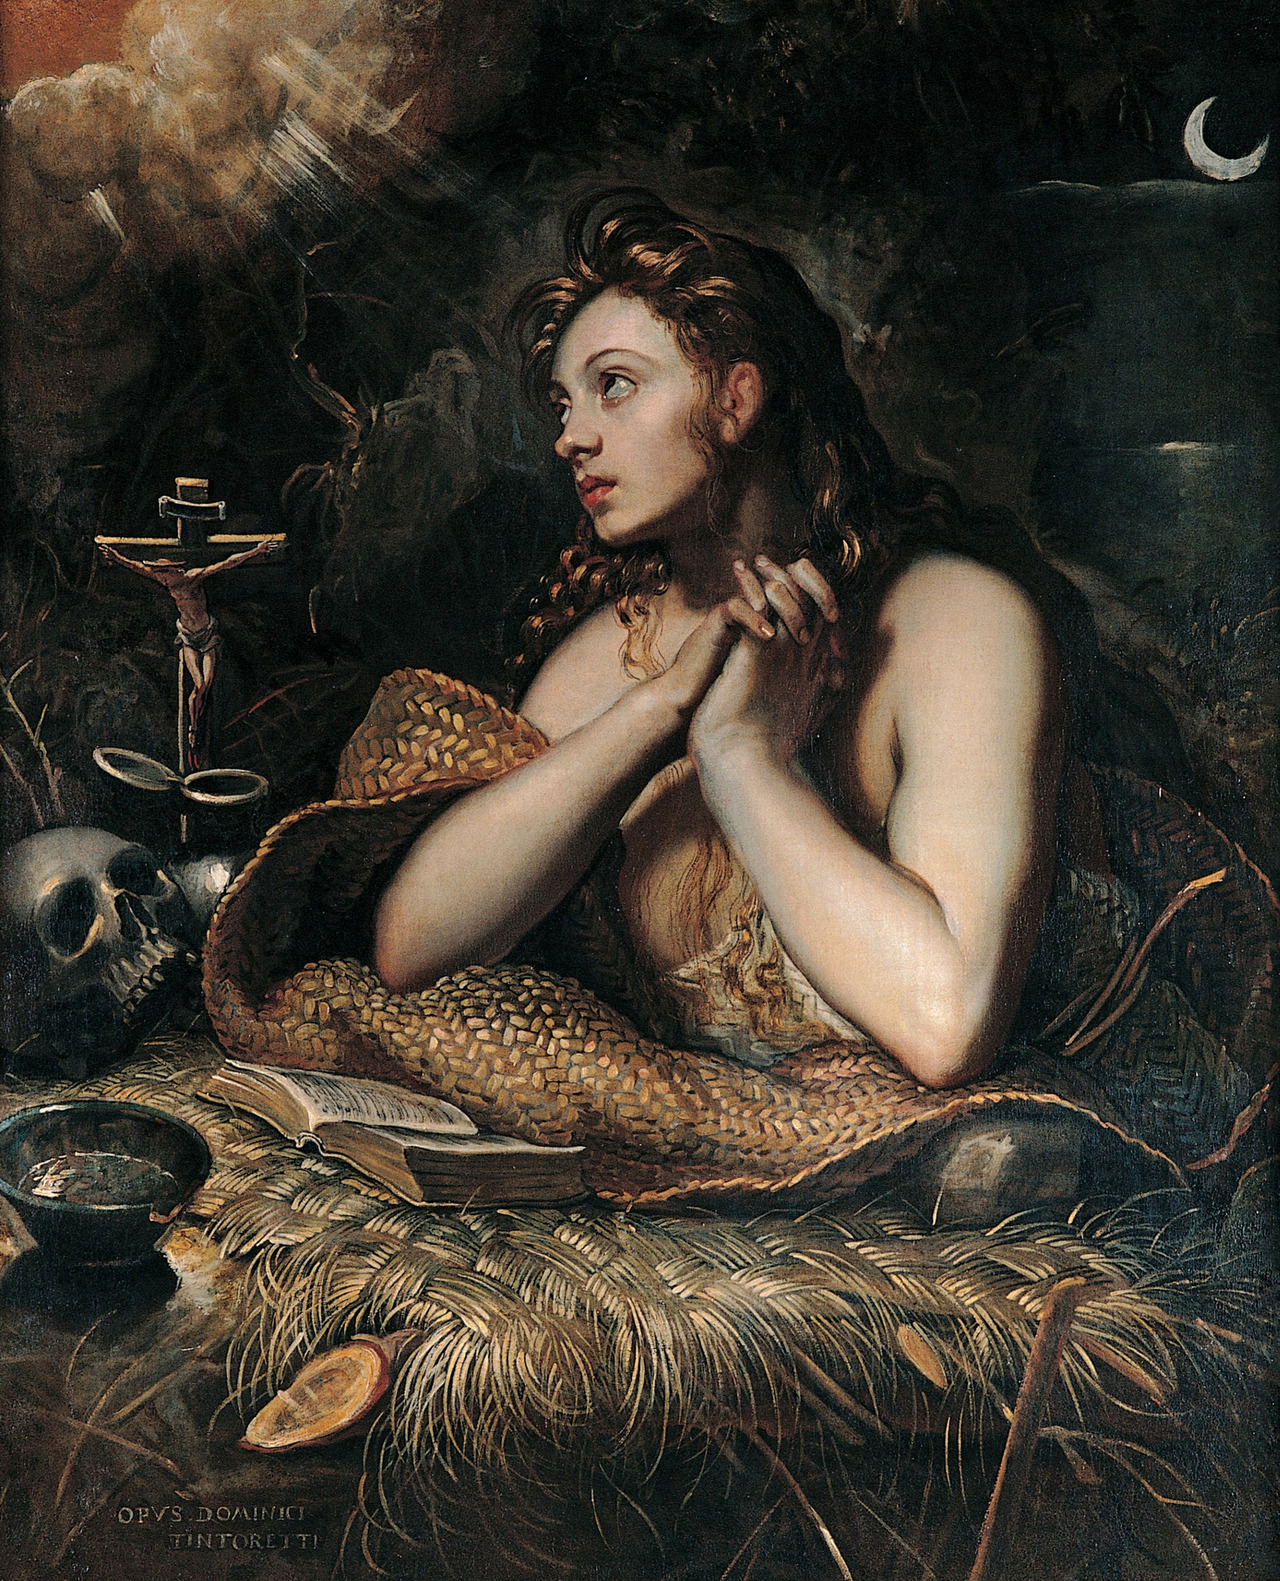 Penitent Magdalene by Domenico Tintoretto, 1959-1602 (Capitoline Museums, Rome)